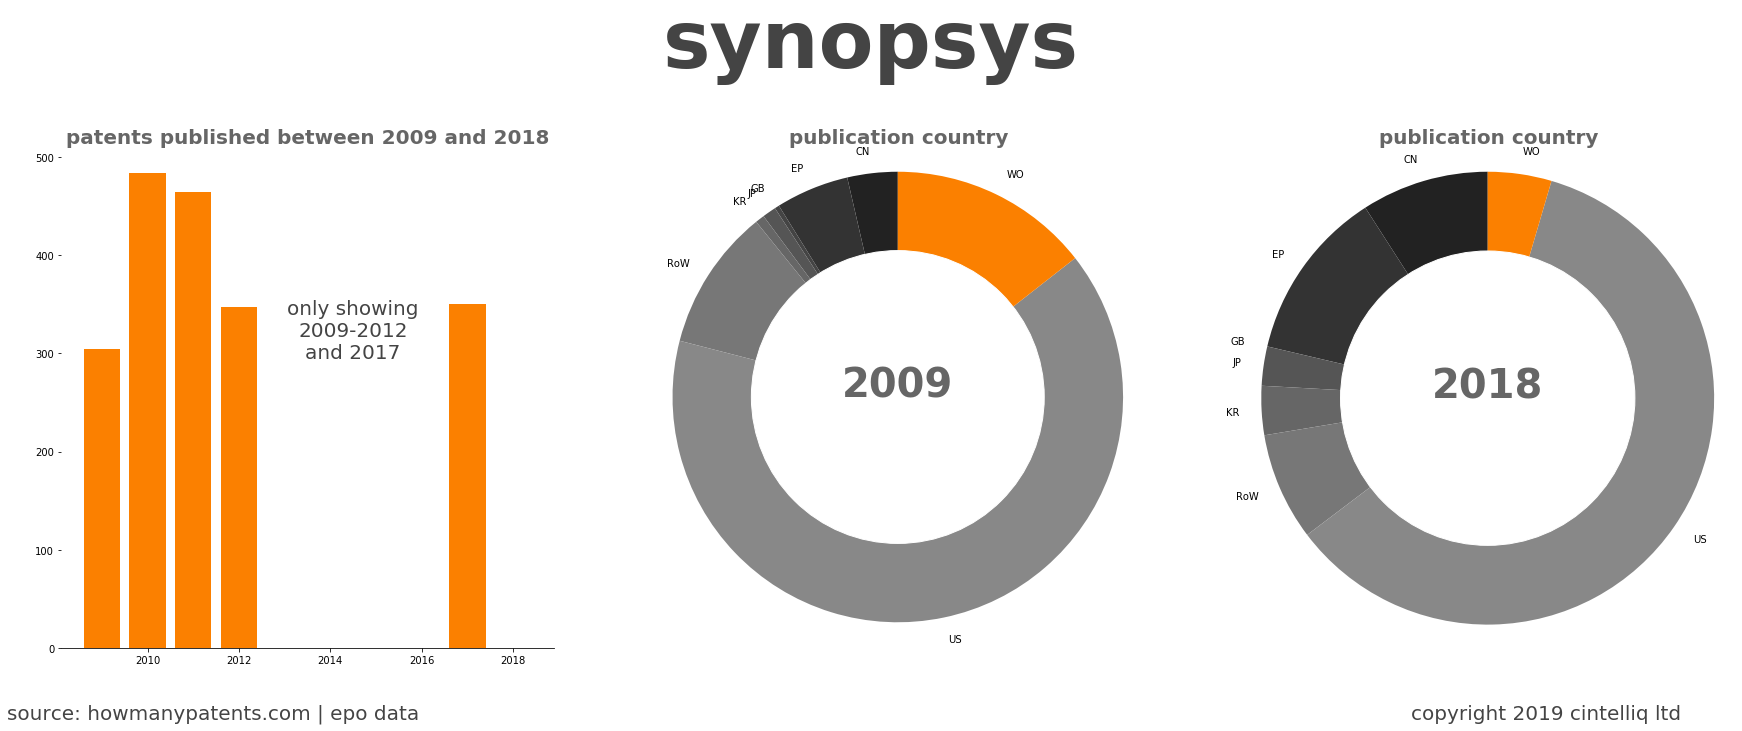 summary of patents for Synopsys